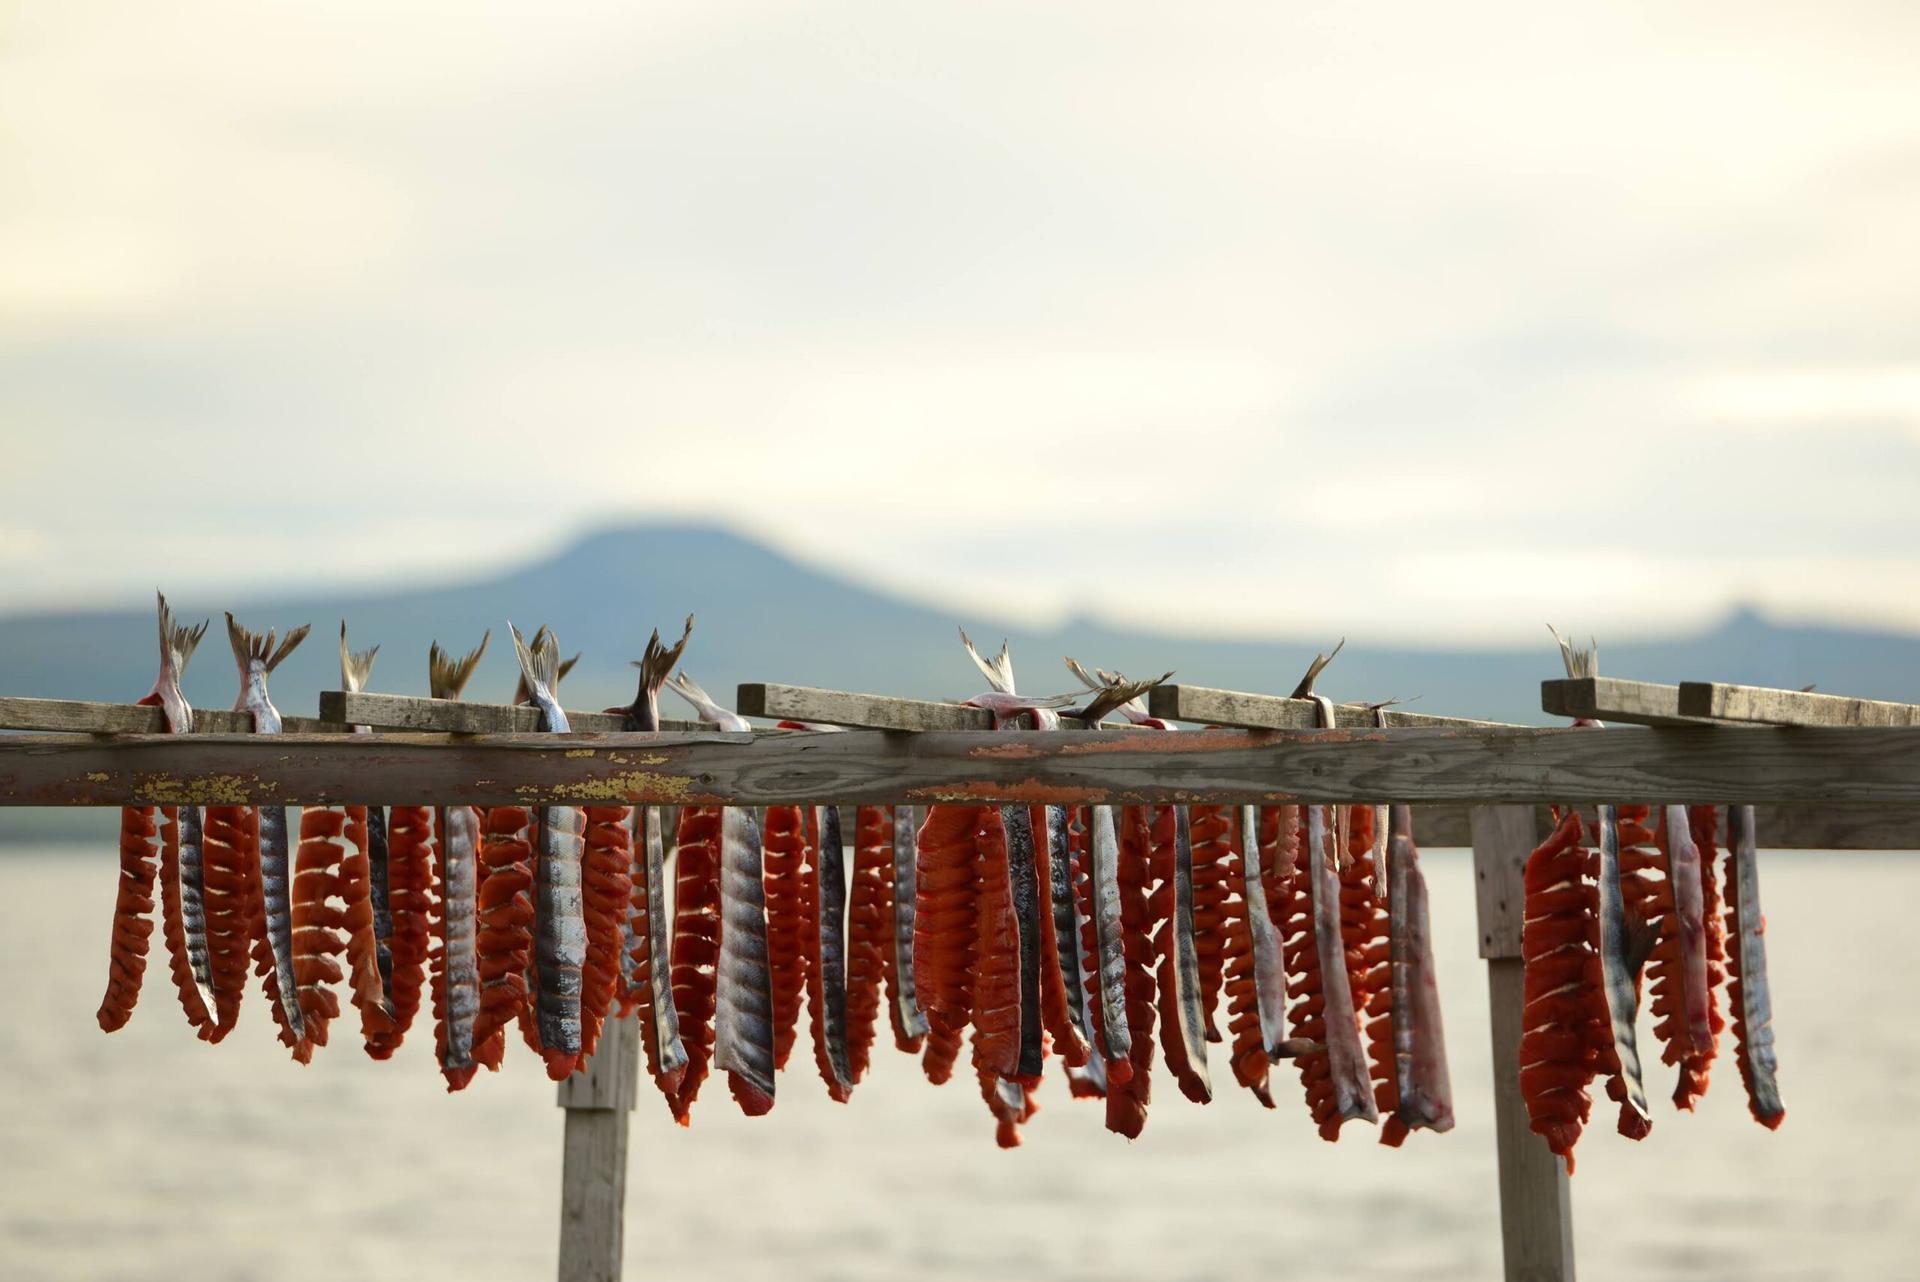 A row of salmon fish hanging to dry on a wooden beam